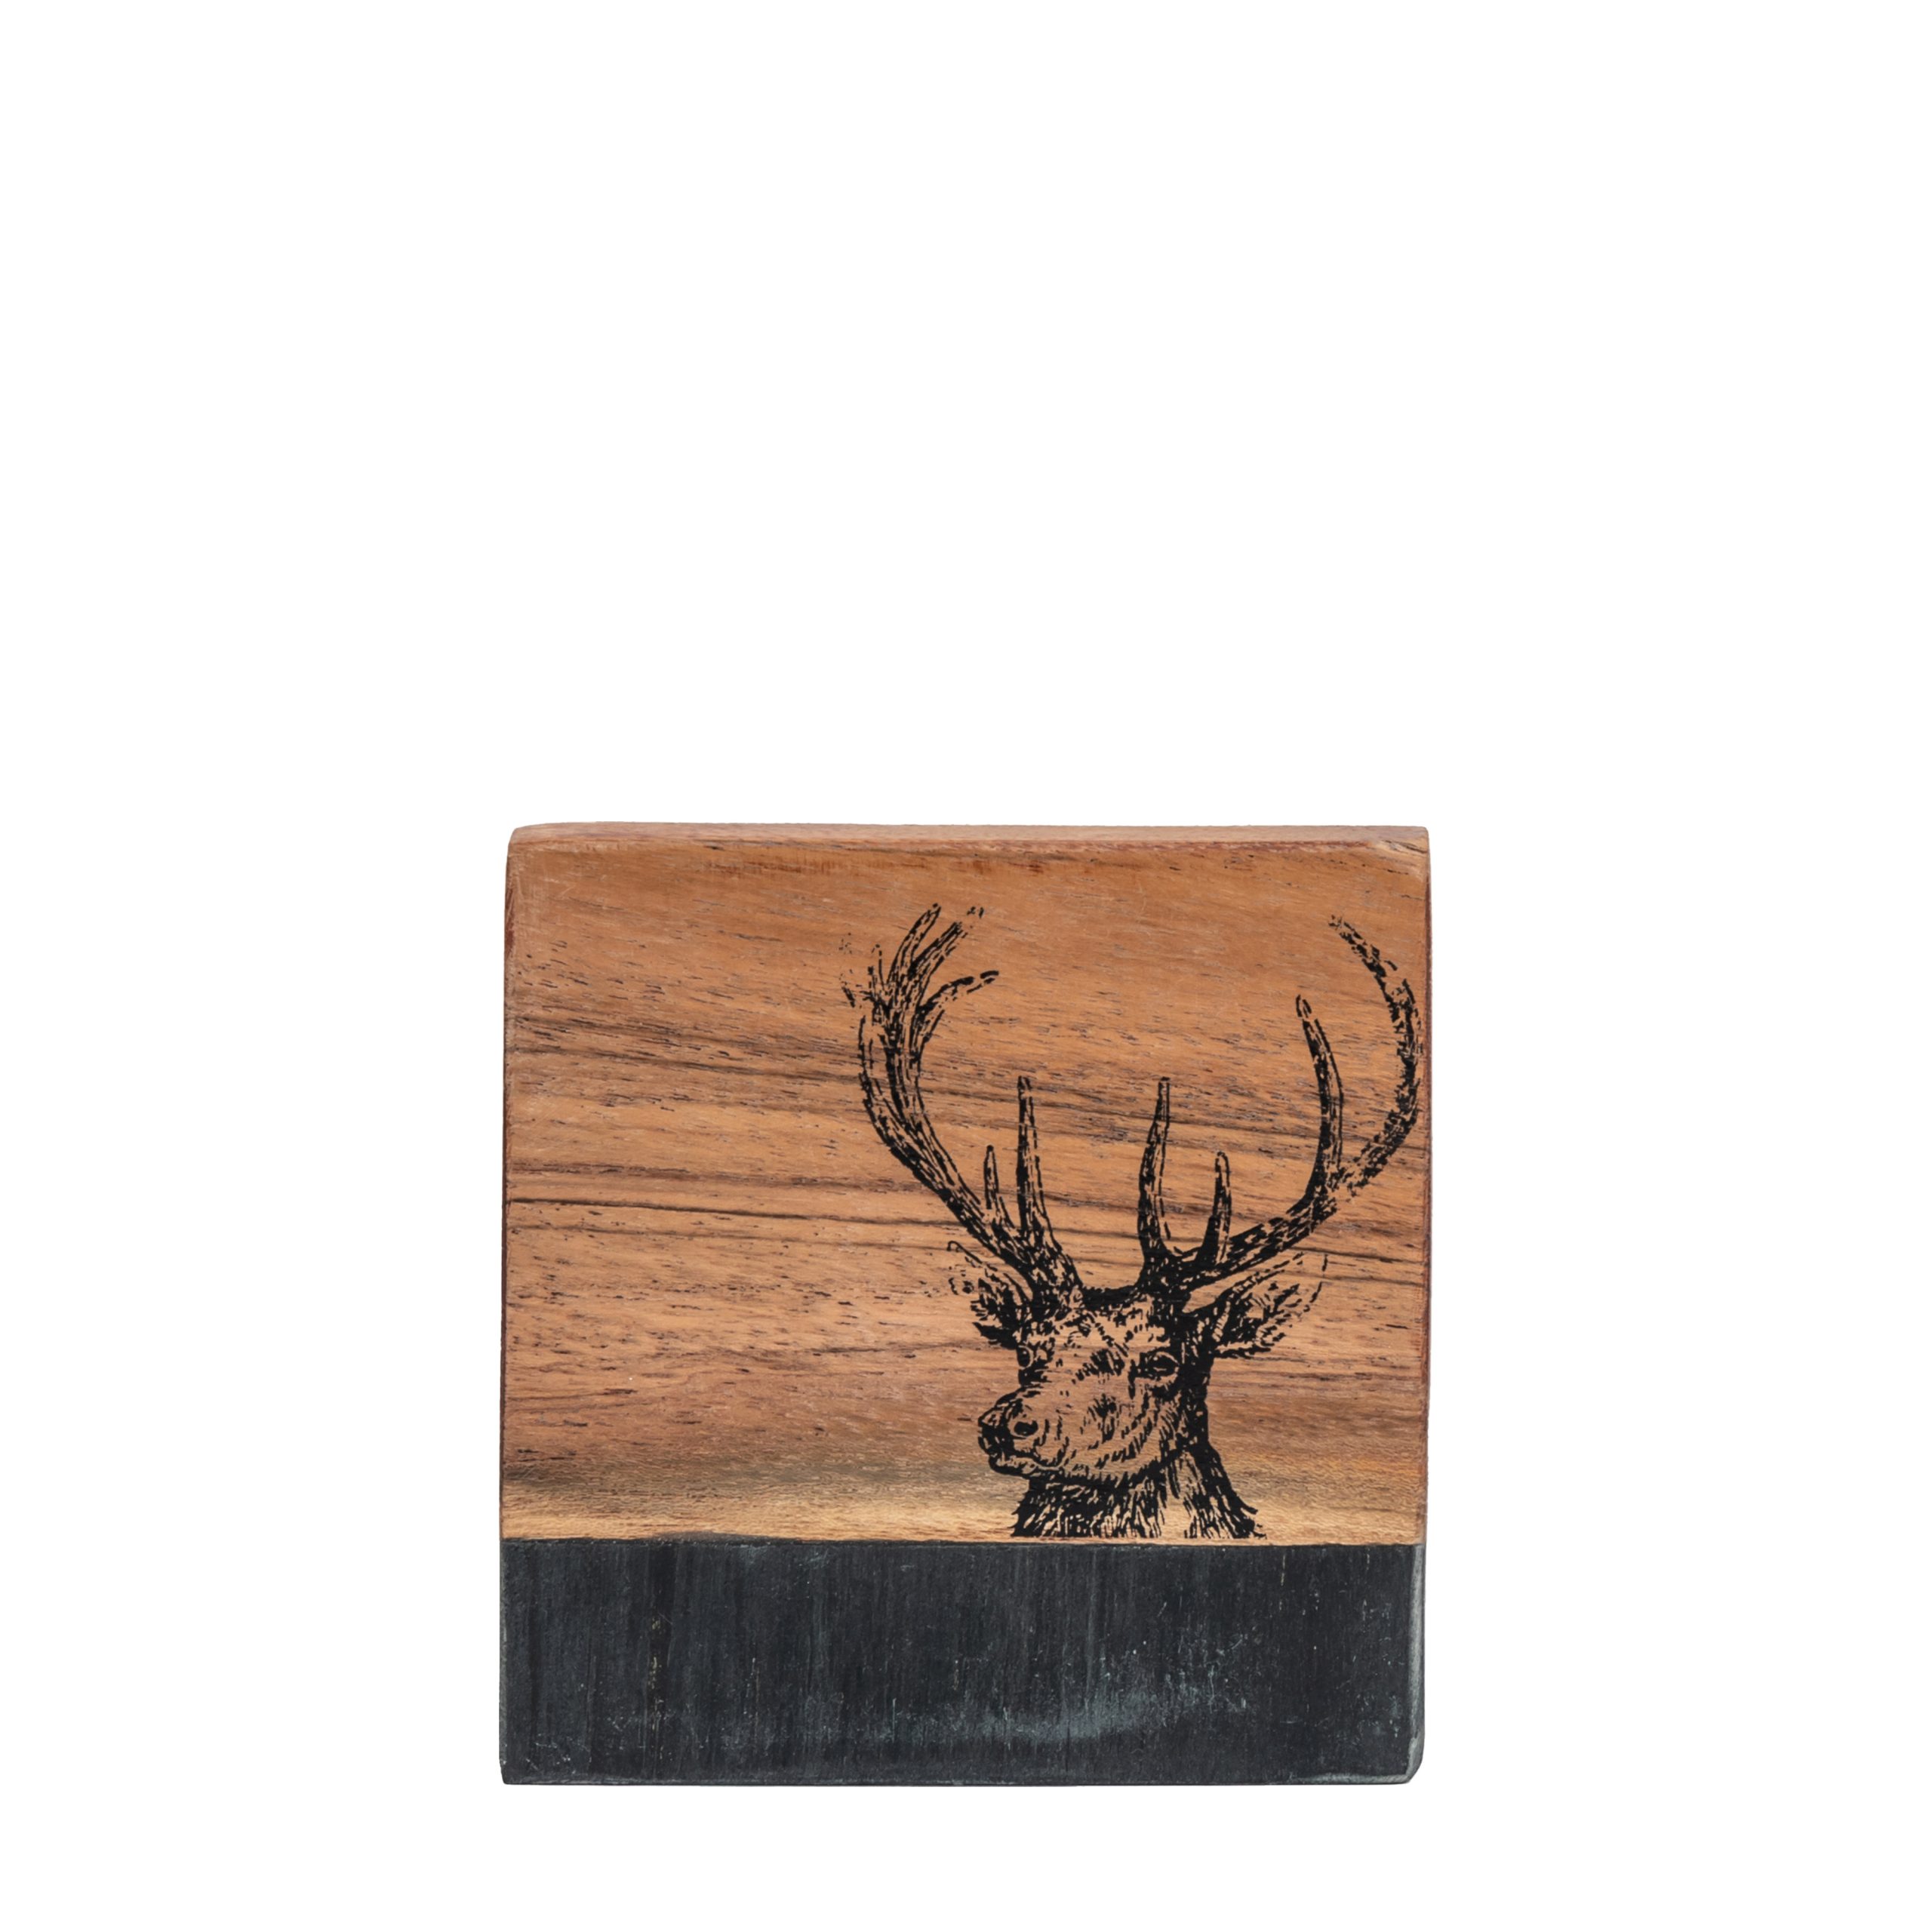 Gallery Direct Stag Coasters Black Marble (Set of 4)